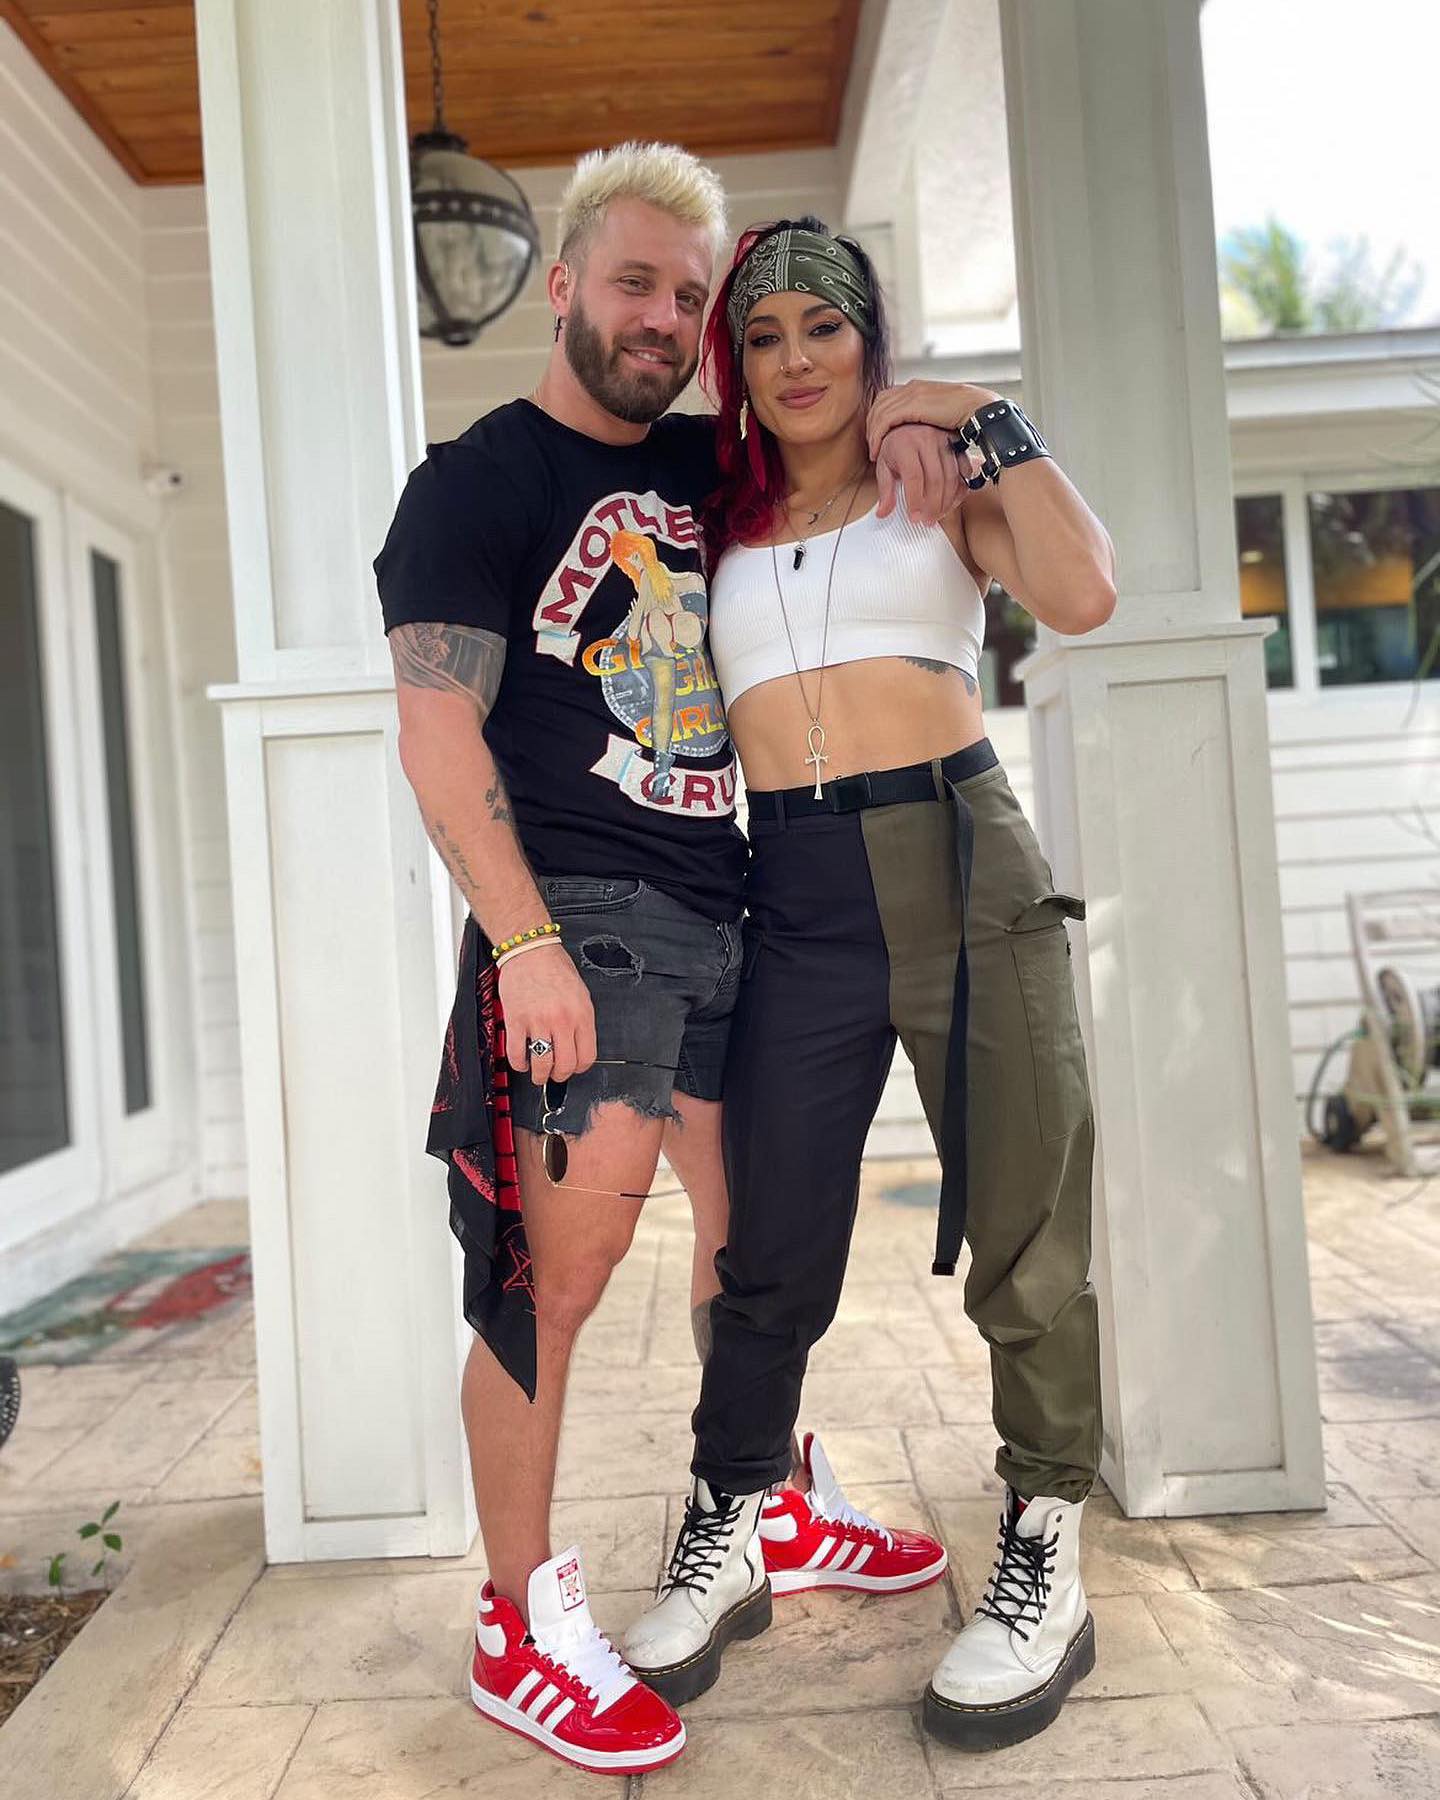 Challenges Cara Maria Sorbello Wants Marriage, Kids With Paulie